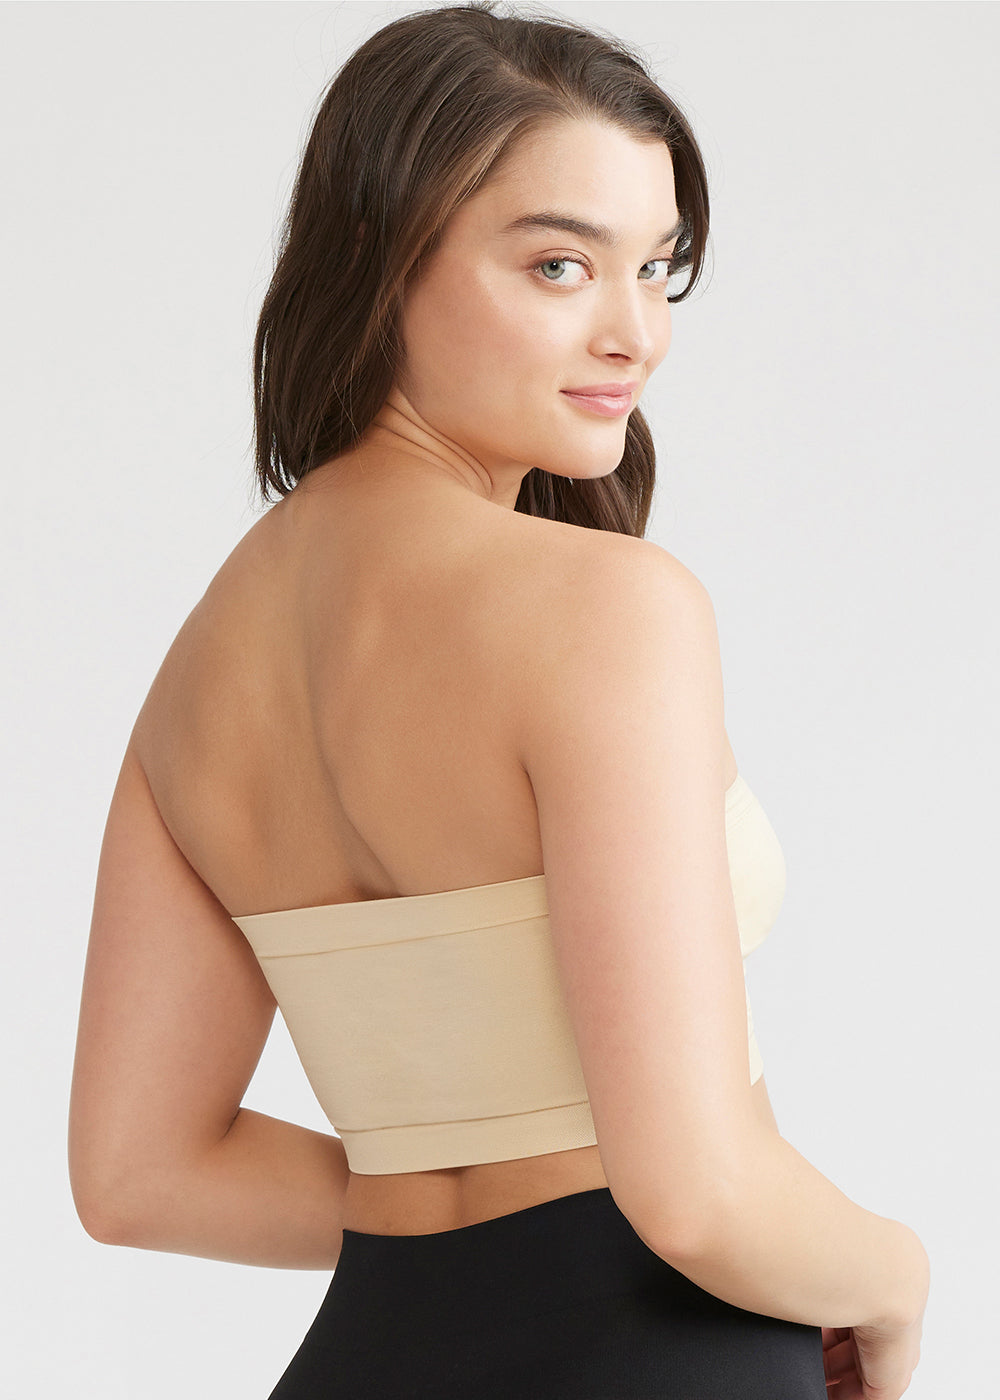 For Spring 2023 – Yummie Brand Introduces Four New Colors and High-Neck  Longline Bra TopFor Spring 2023 - Yummie Brand Introduces Four New Colors  and High-Neck Longline Bra Top - LivingBetter50 